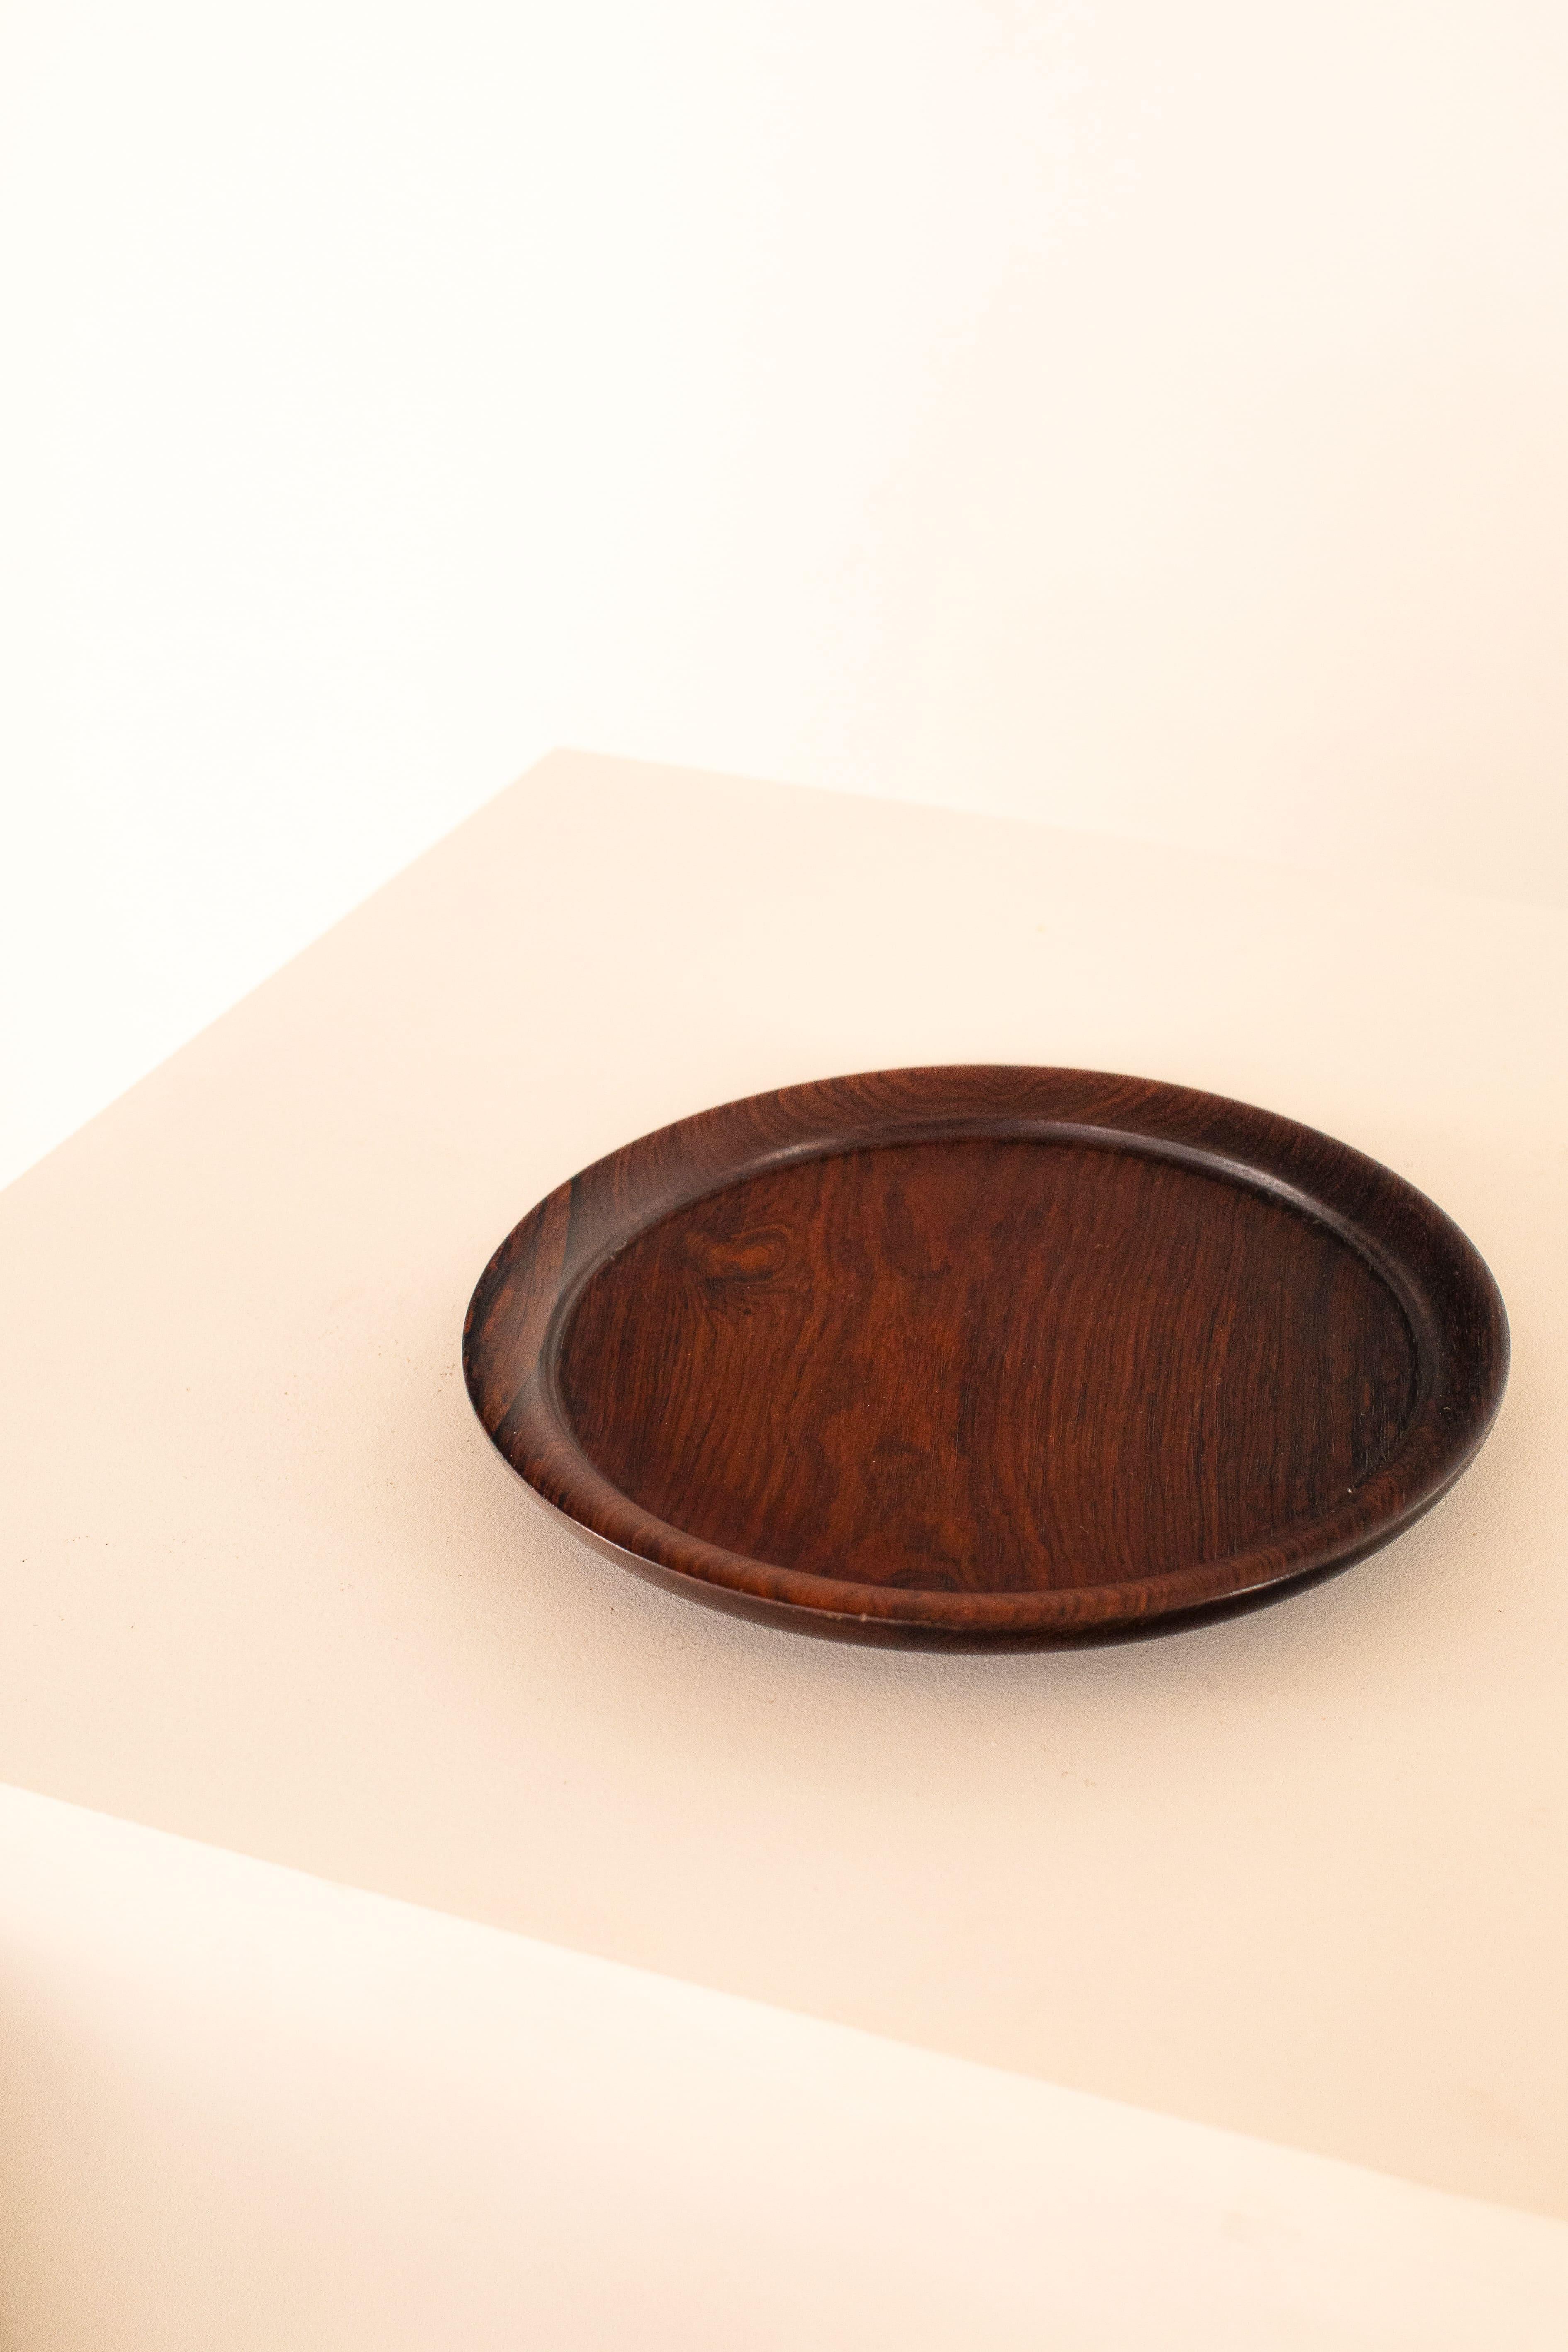 Beautiful serving plate made of a single piece of Brazilian rosewood of unknown authorship.